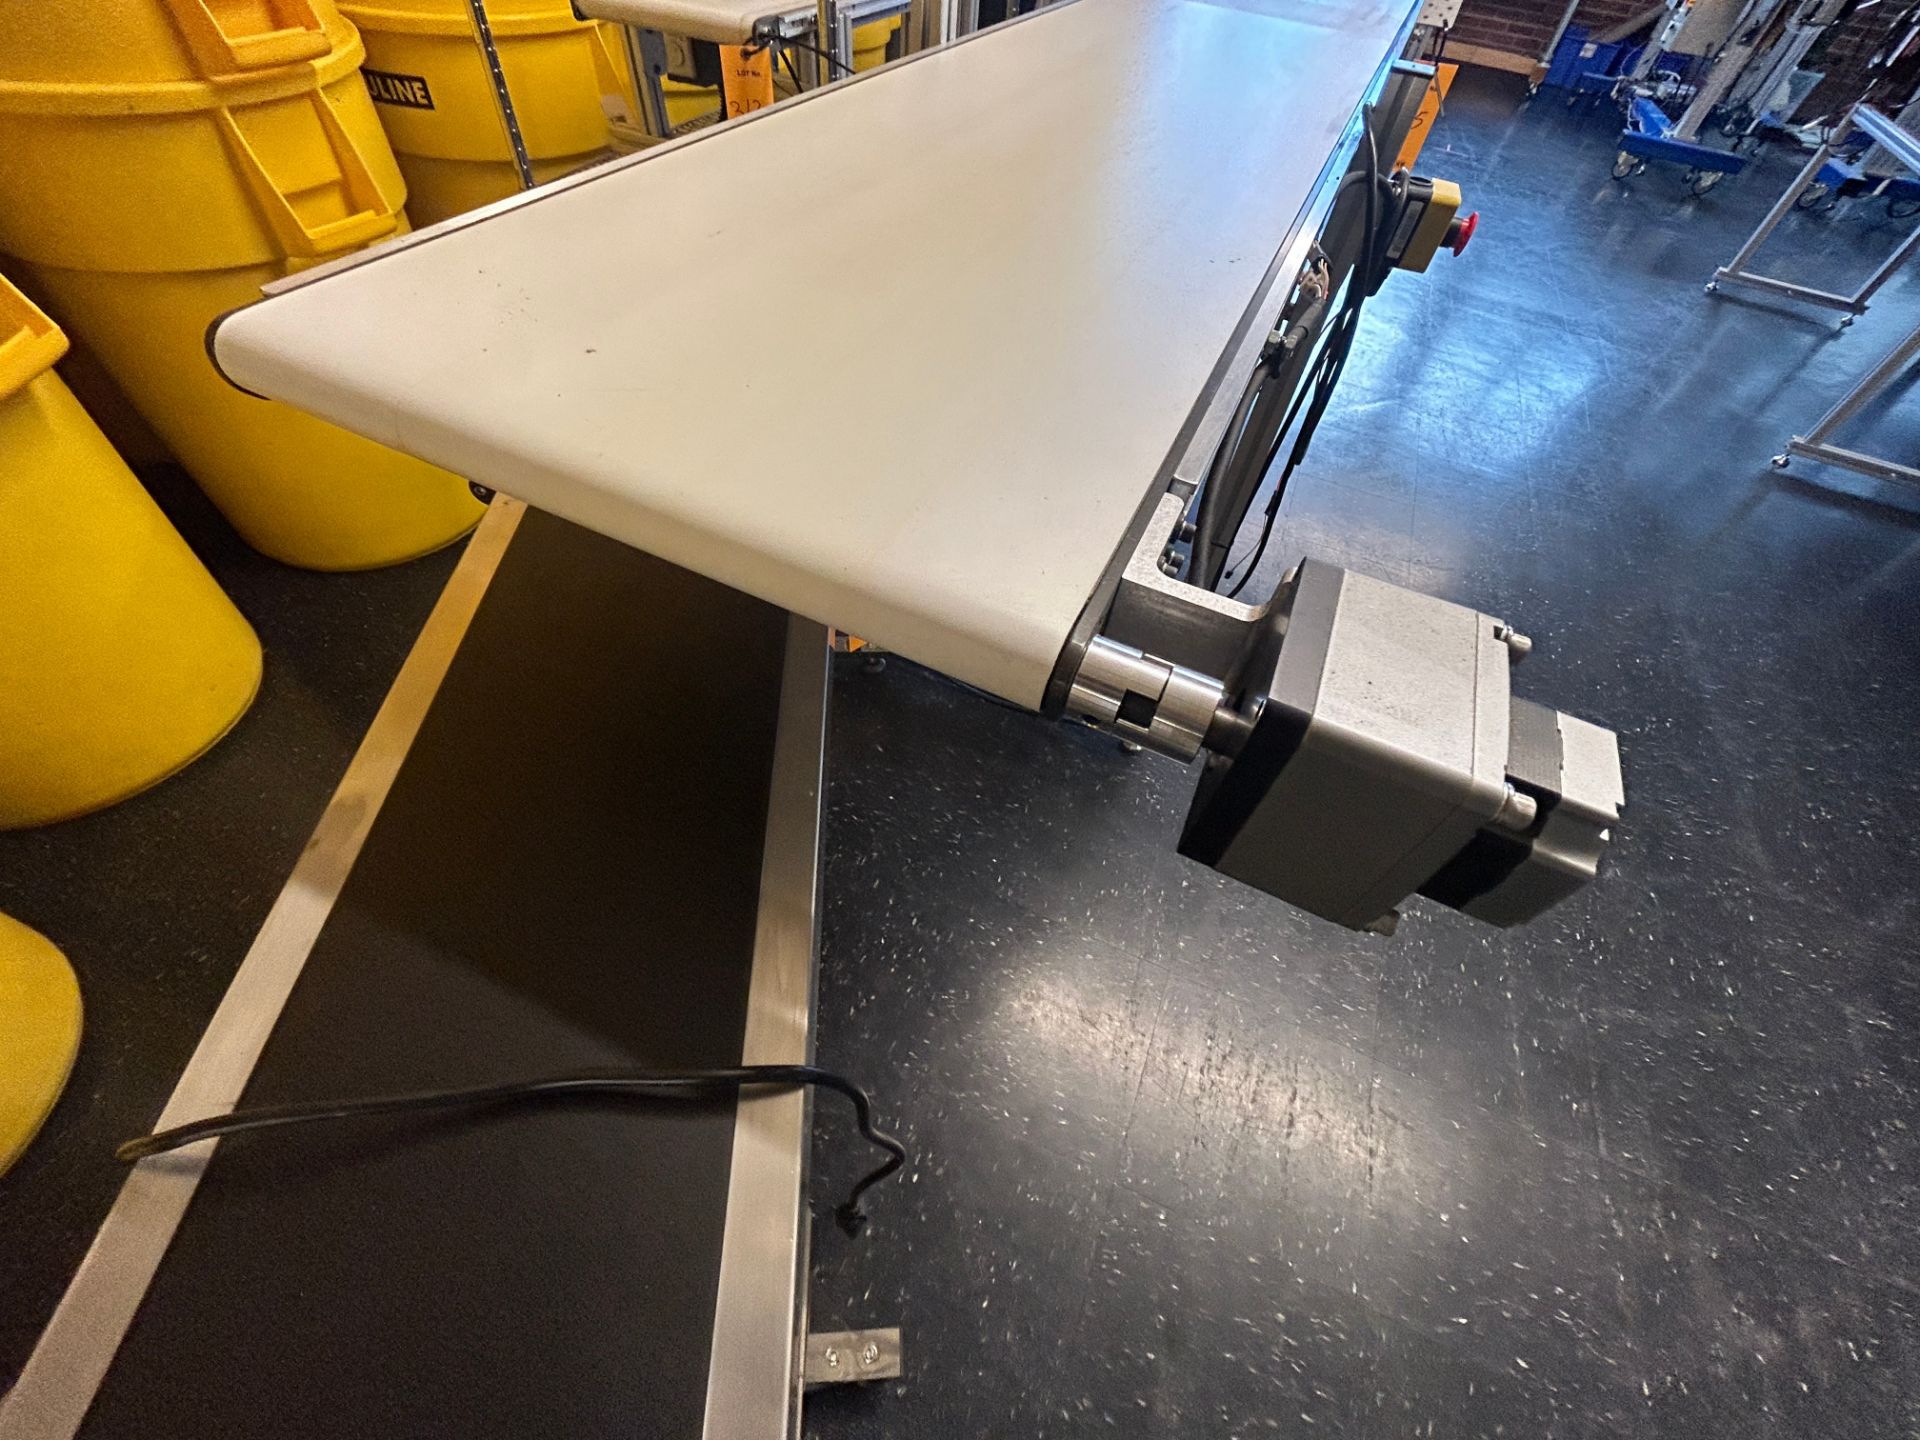 16 Inch Wide X 140 Inch Long Flat Belt Conveyor, Height Adjustable Legs, With Orientalmotor Variable - Image 2 of 5